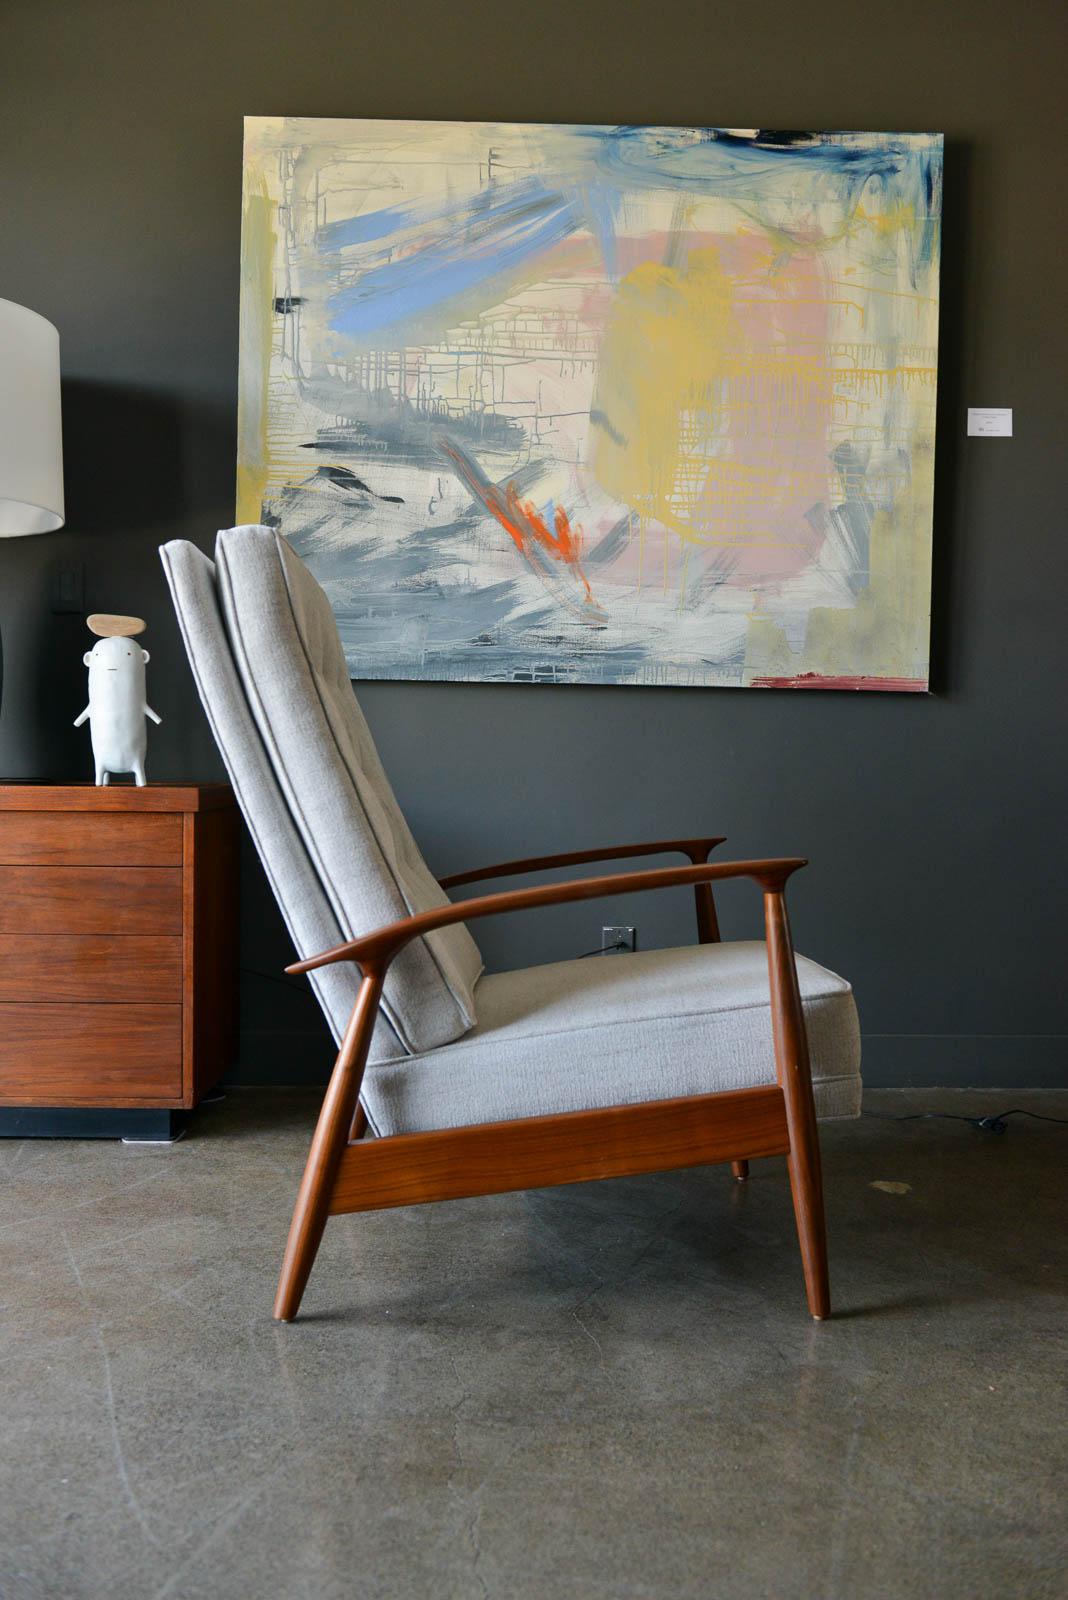 Milo Baughman for James, Inc. sculpted walnut reclining lounge chair, circa 1955. Professionally restored walnut frame with new light grey textured fabric and tufted button back. Reclining mechanism hides underneath chair when not in use and is